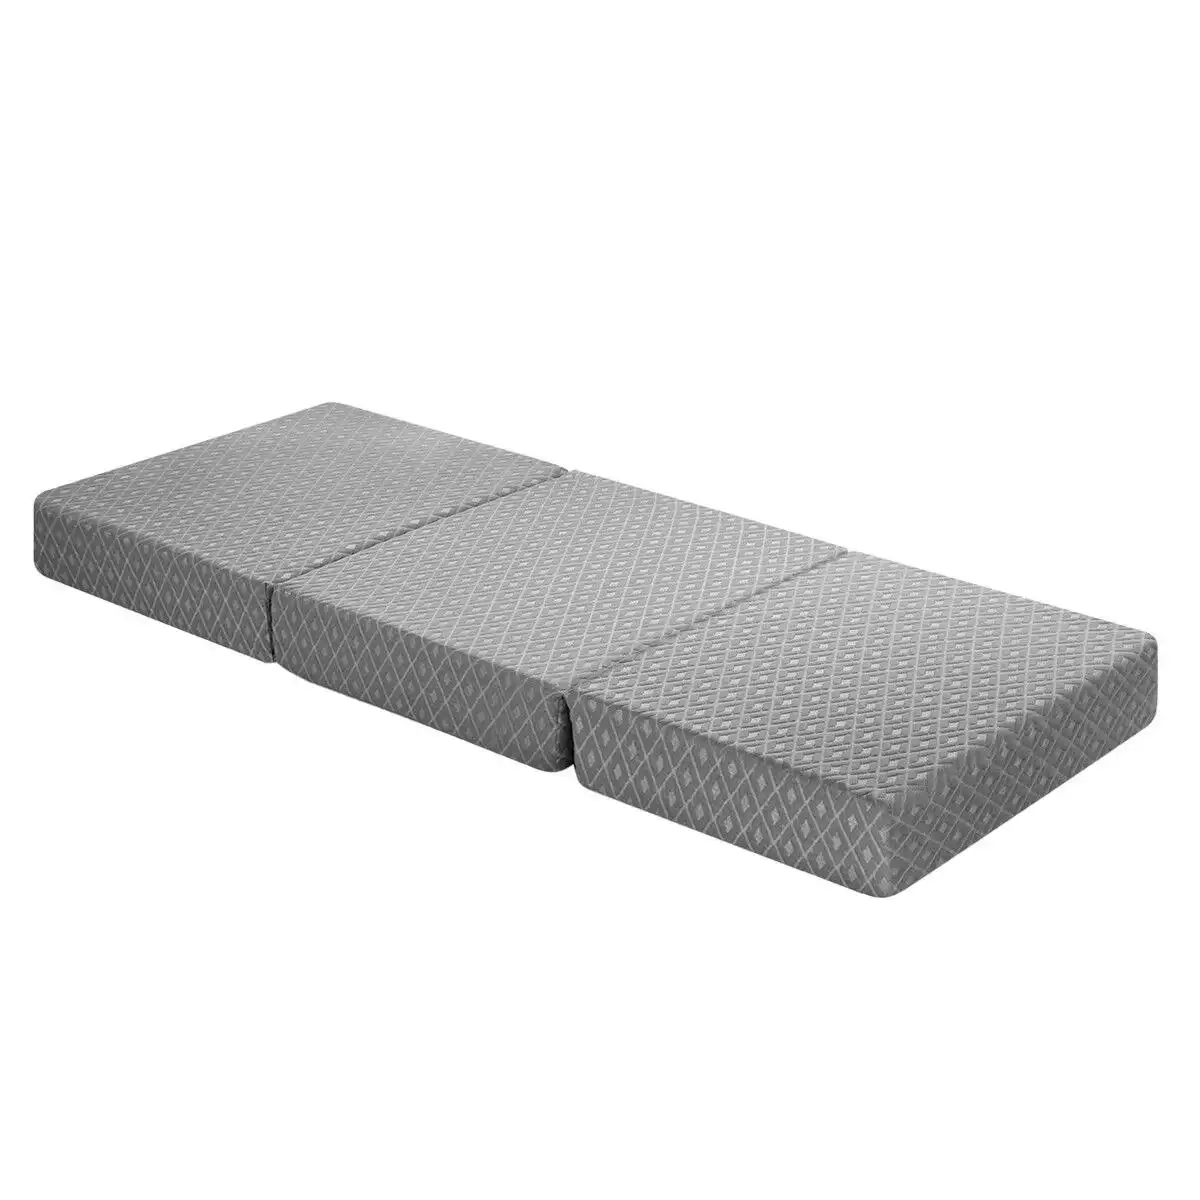 Luxdream Folding Foam Mattress Sleeping Mat Portable Trifold Sofa Bed Camping Floor Extra Thick Cushion Removable Cover